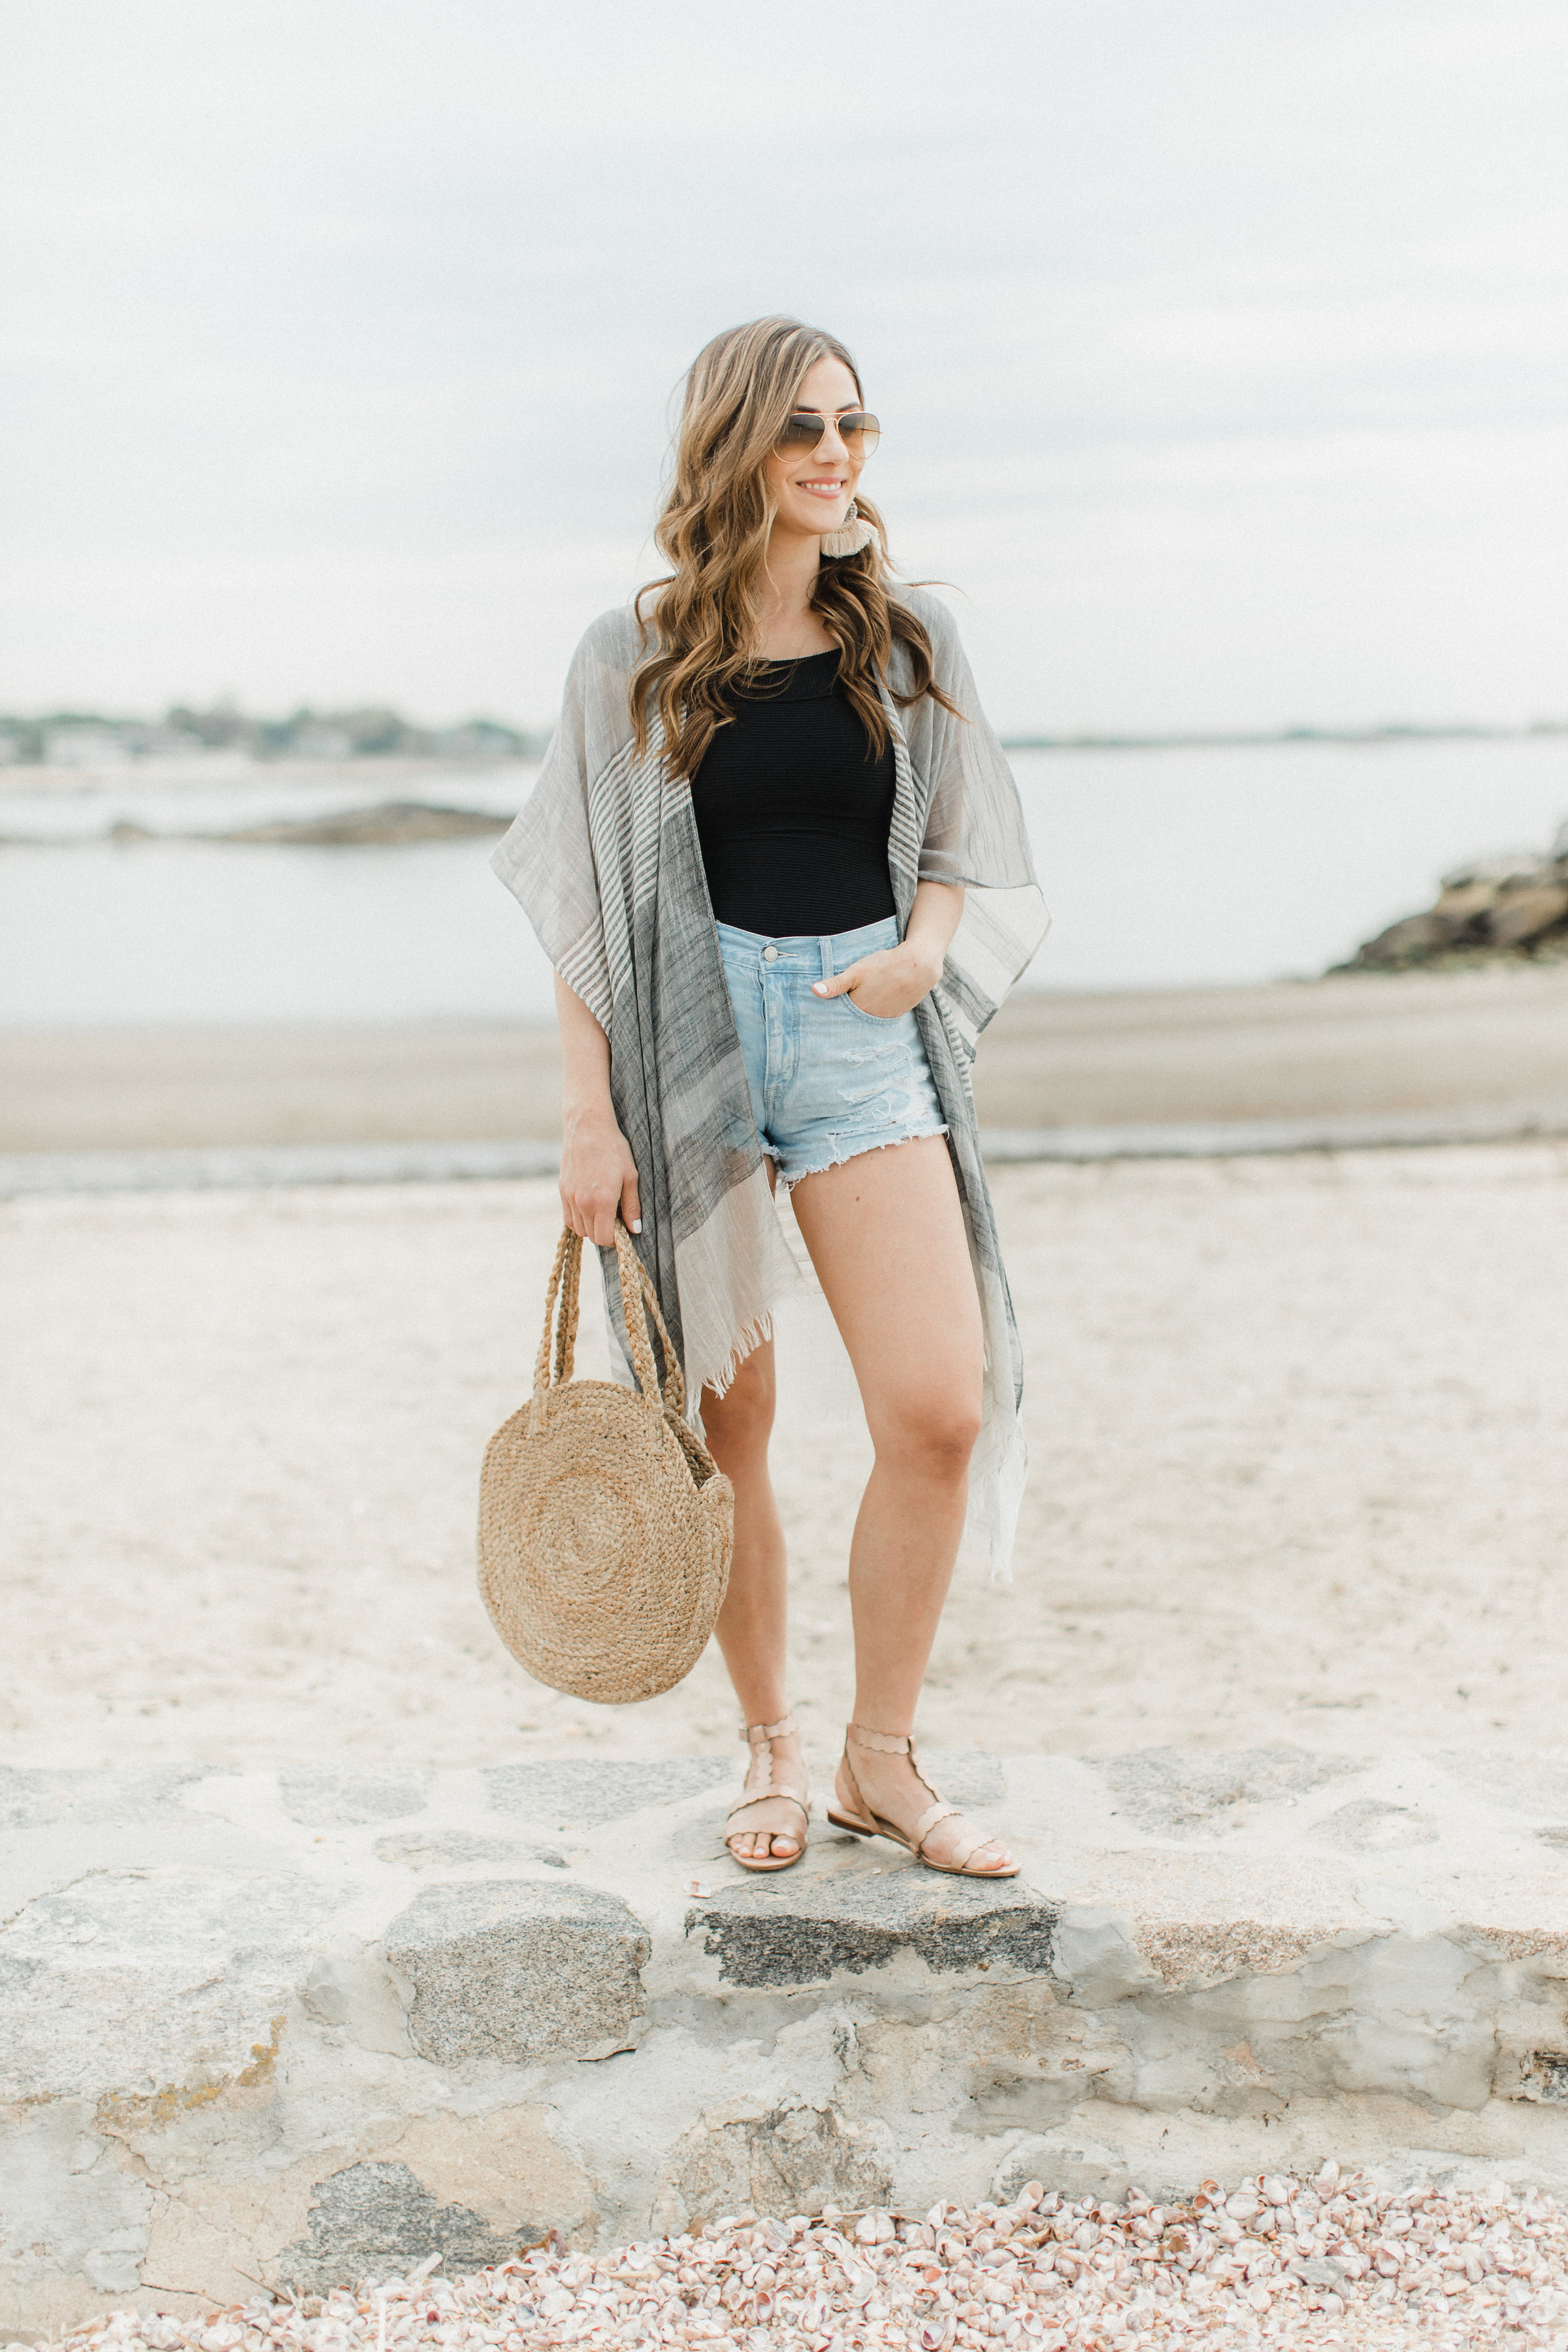 Life and style blogger Lauren McBride shares How to Style a Kimono for summer, featuring two looks taking a kimono from daytime to nighttime.